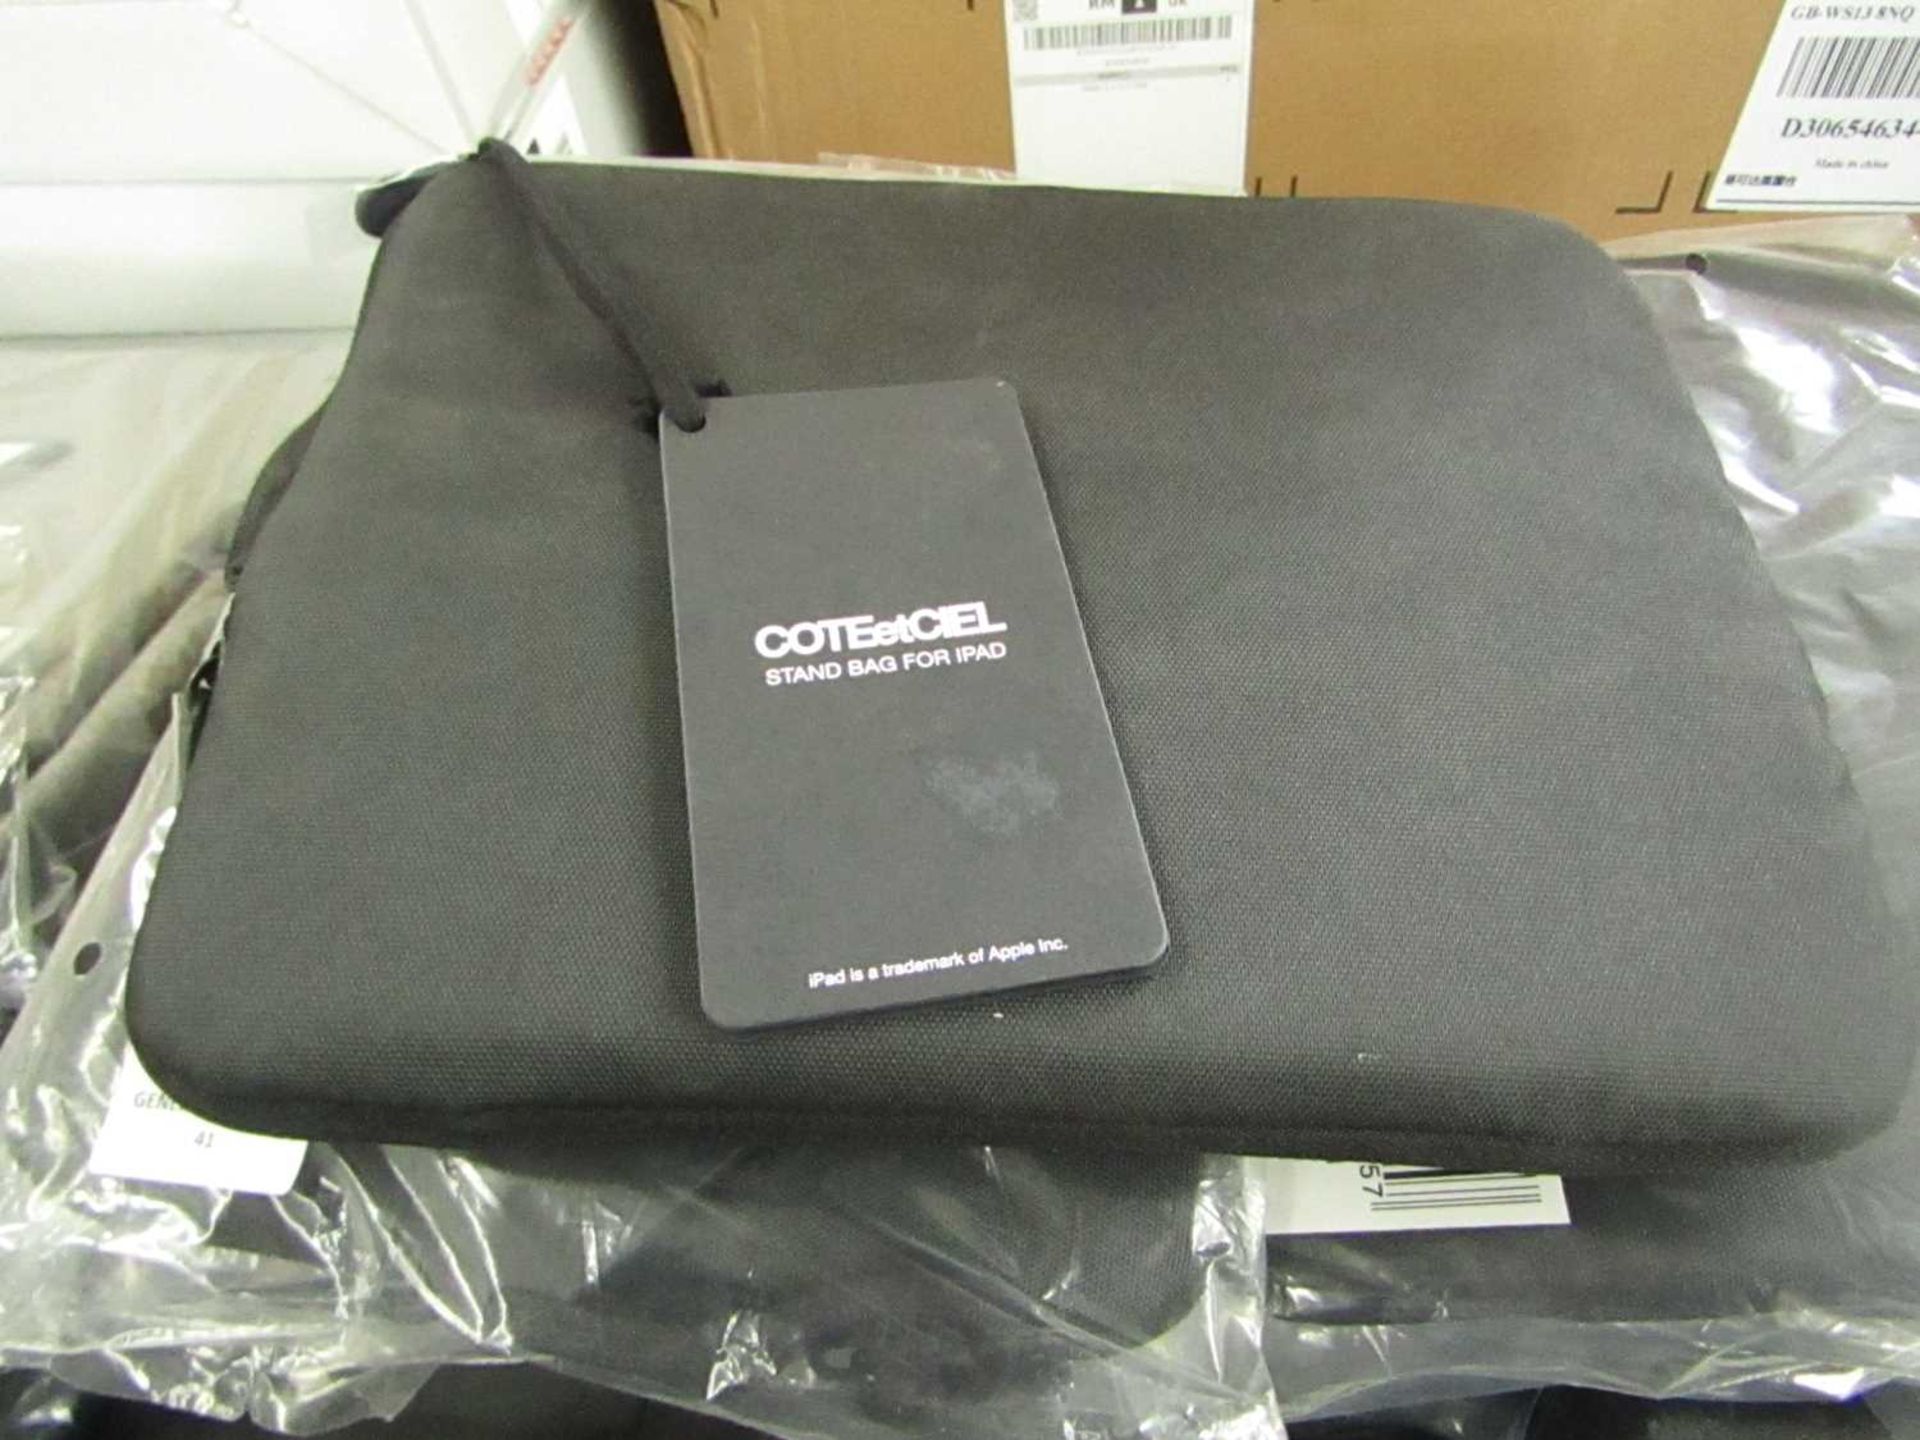 VAT 6x COTEetCIAL - Black Stand Bag For Ipad - Unused & Packaged.